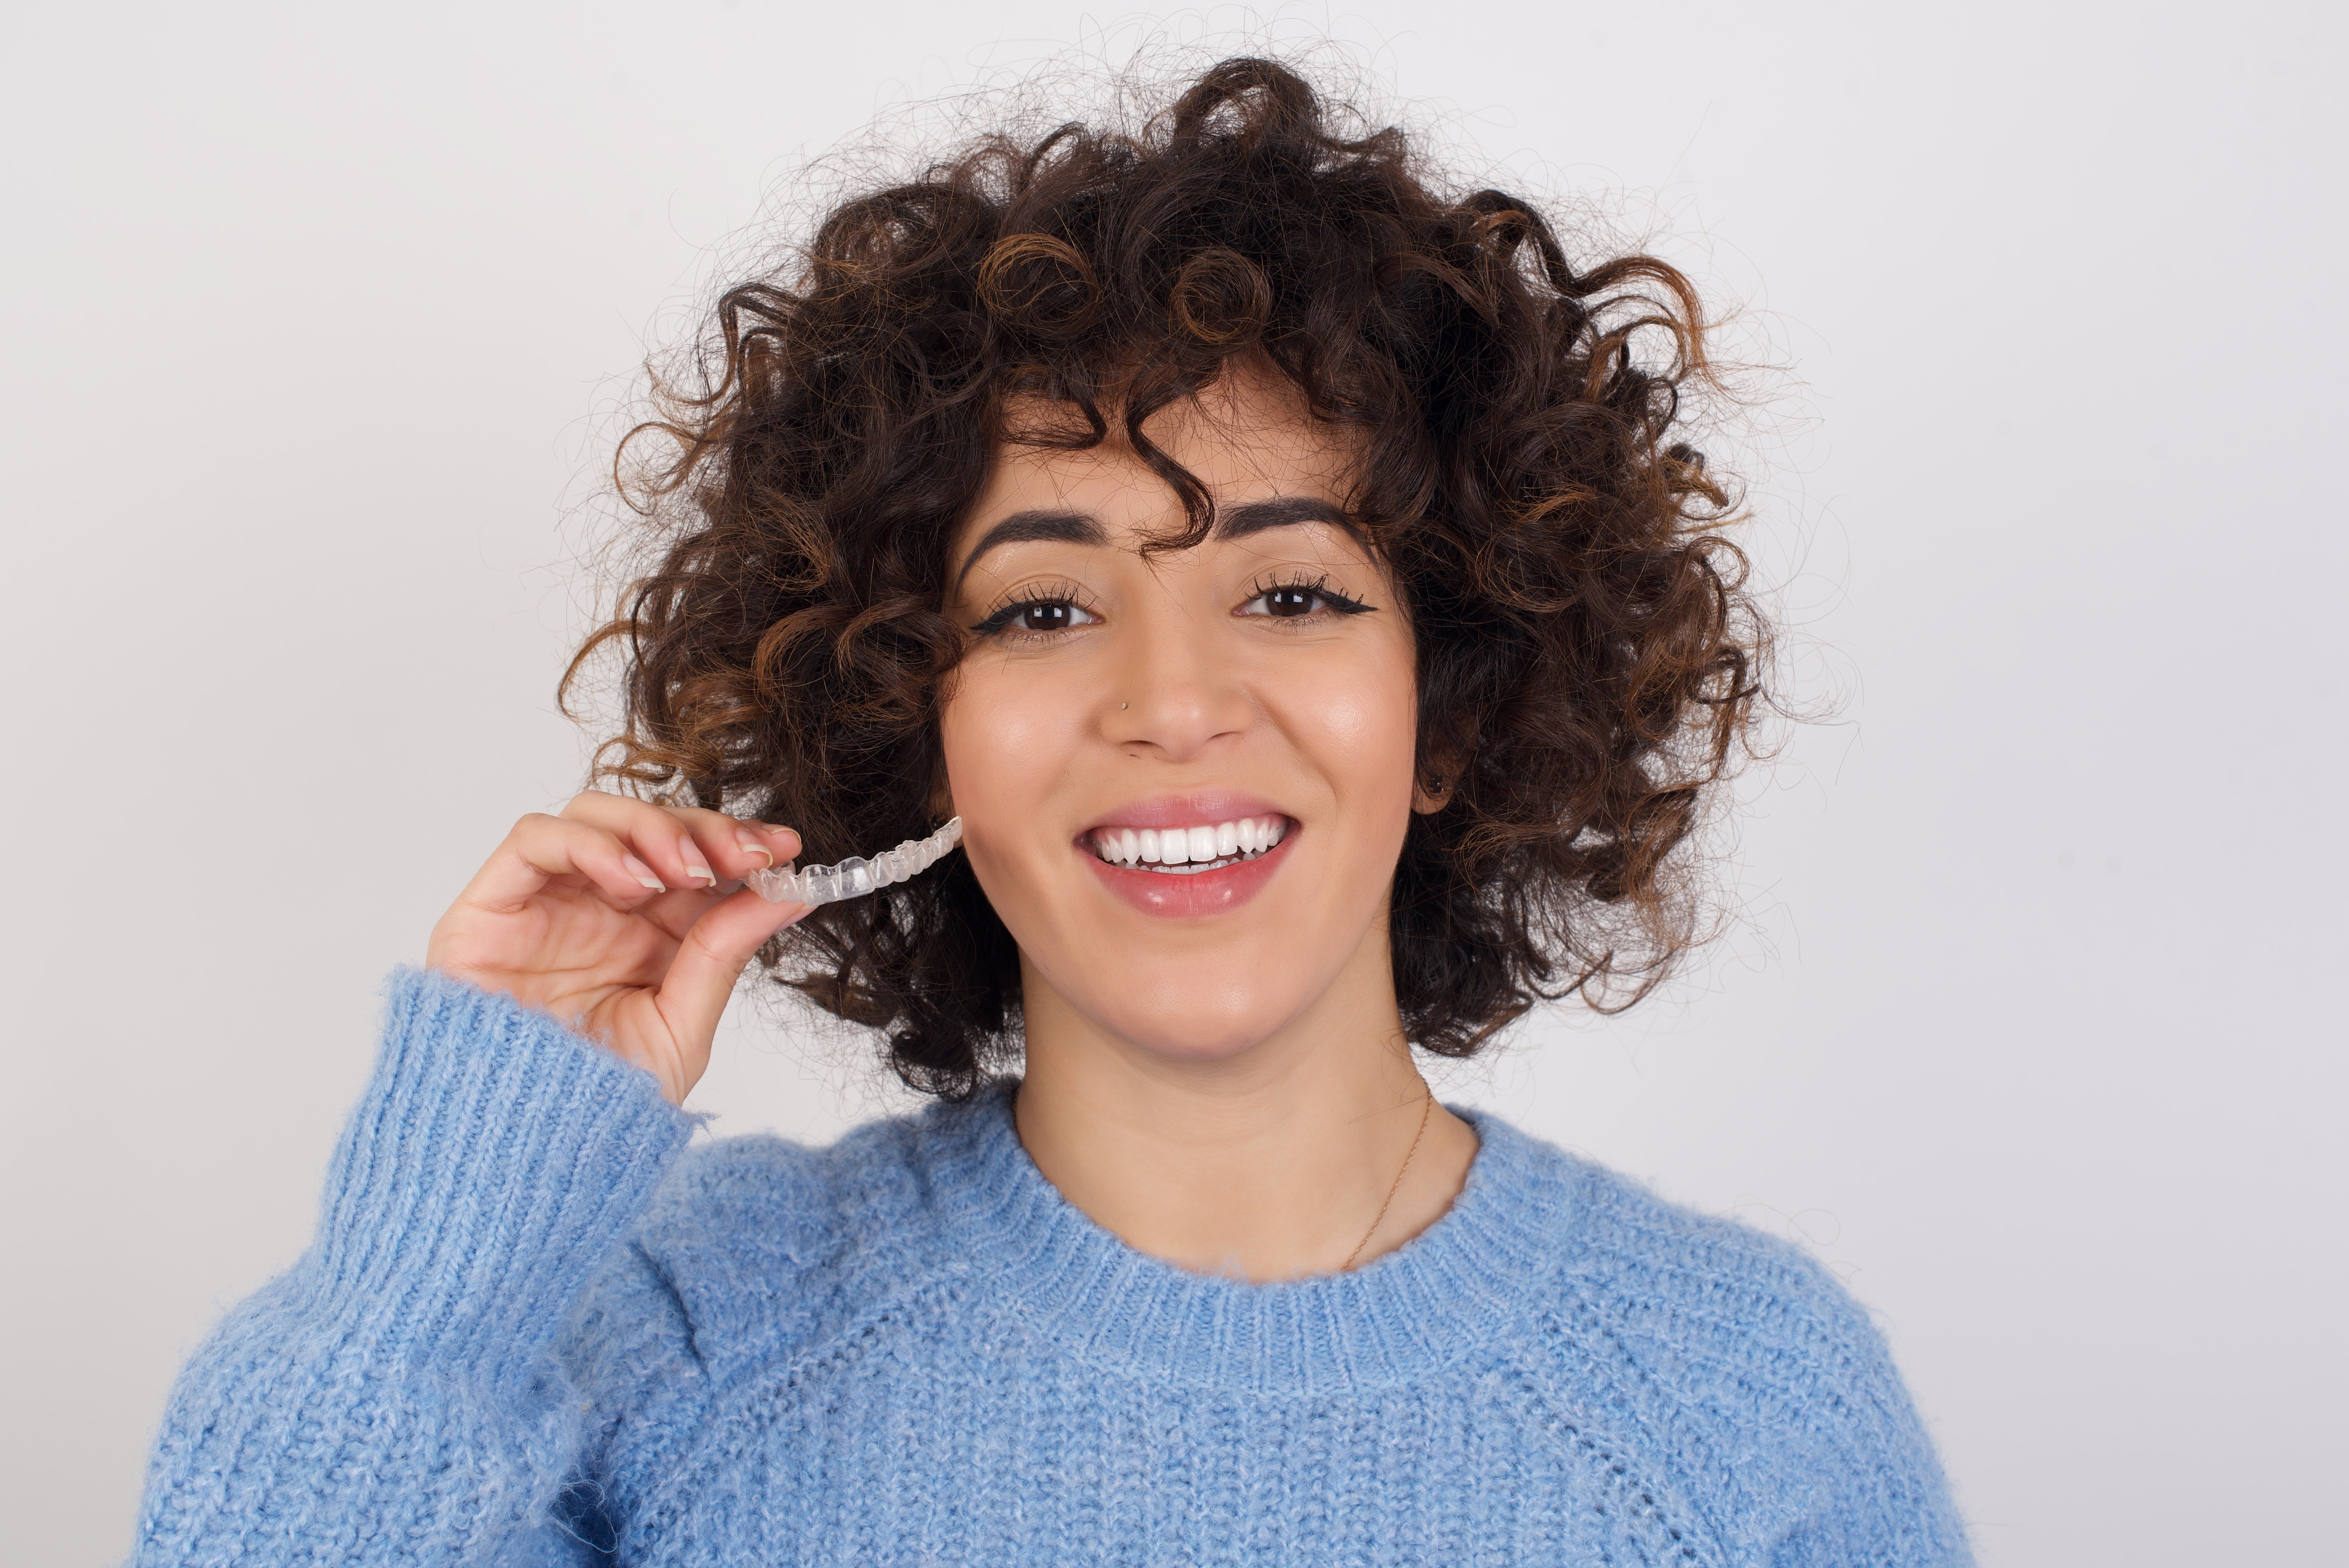 do clear aligners work